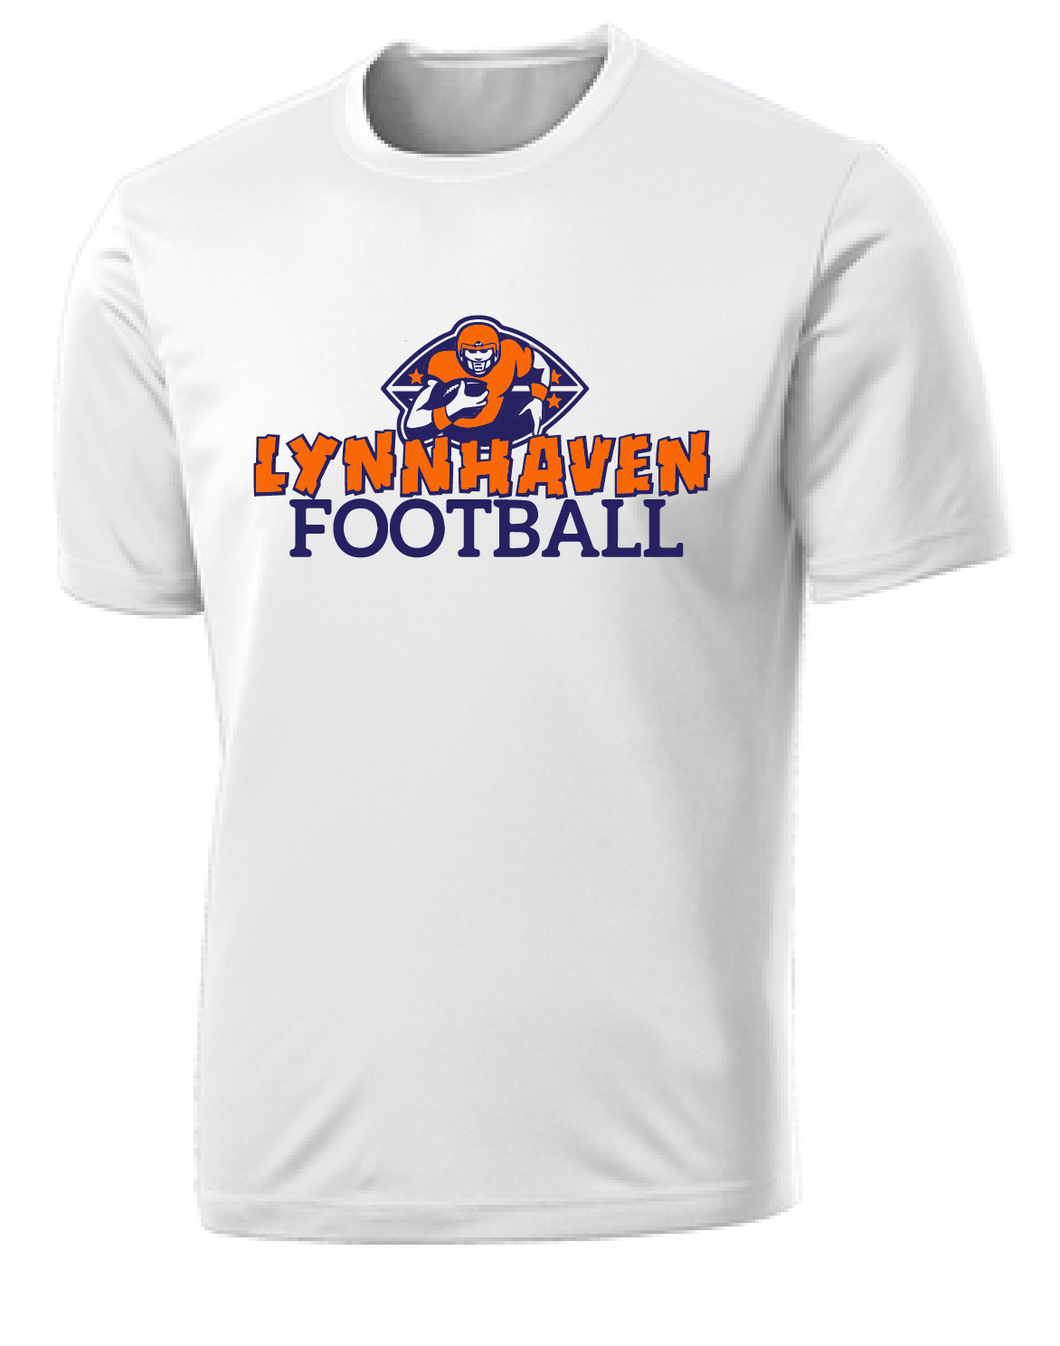 Performance T-Shirt (Youth & Adult) / White / Lynnhaven Football